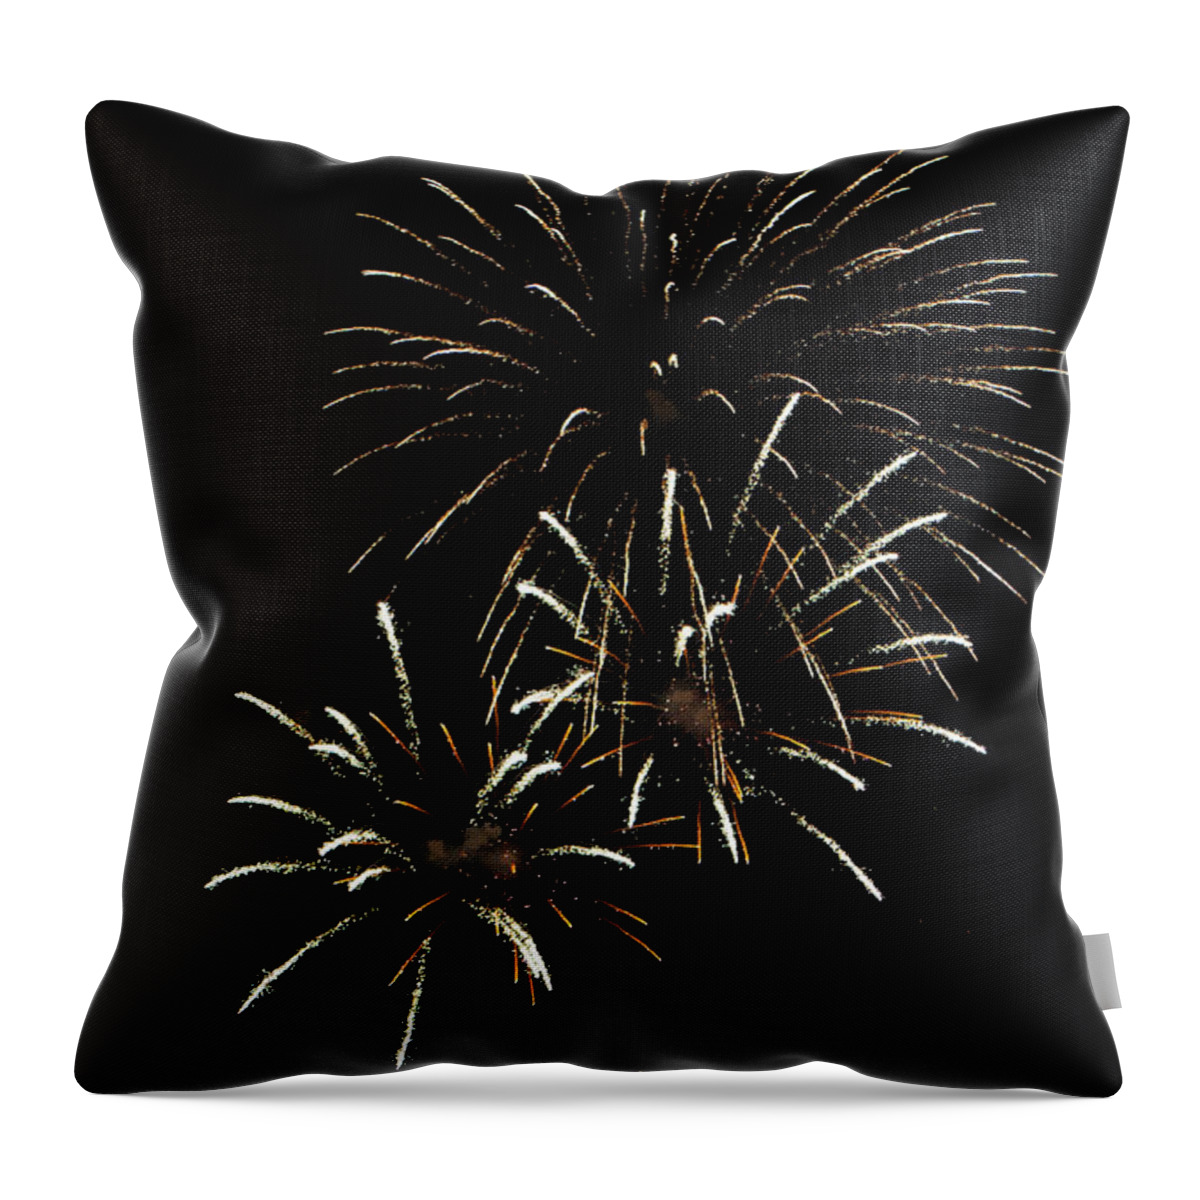 Fireworks Throw Pillow featuring the photograph Fireworks3_8690 by Rocco Leone